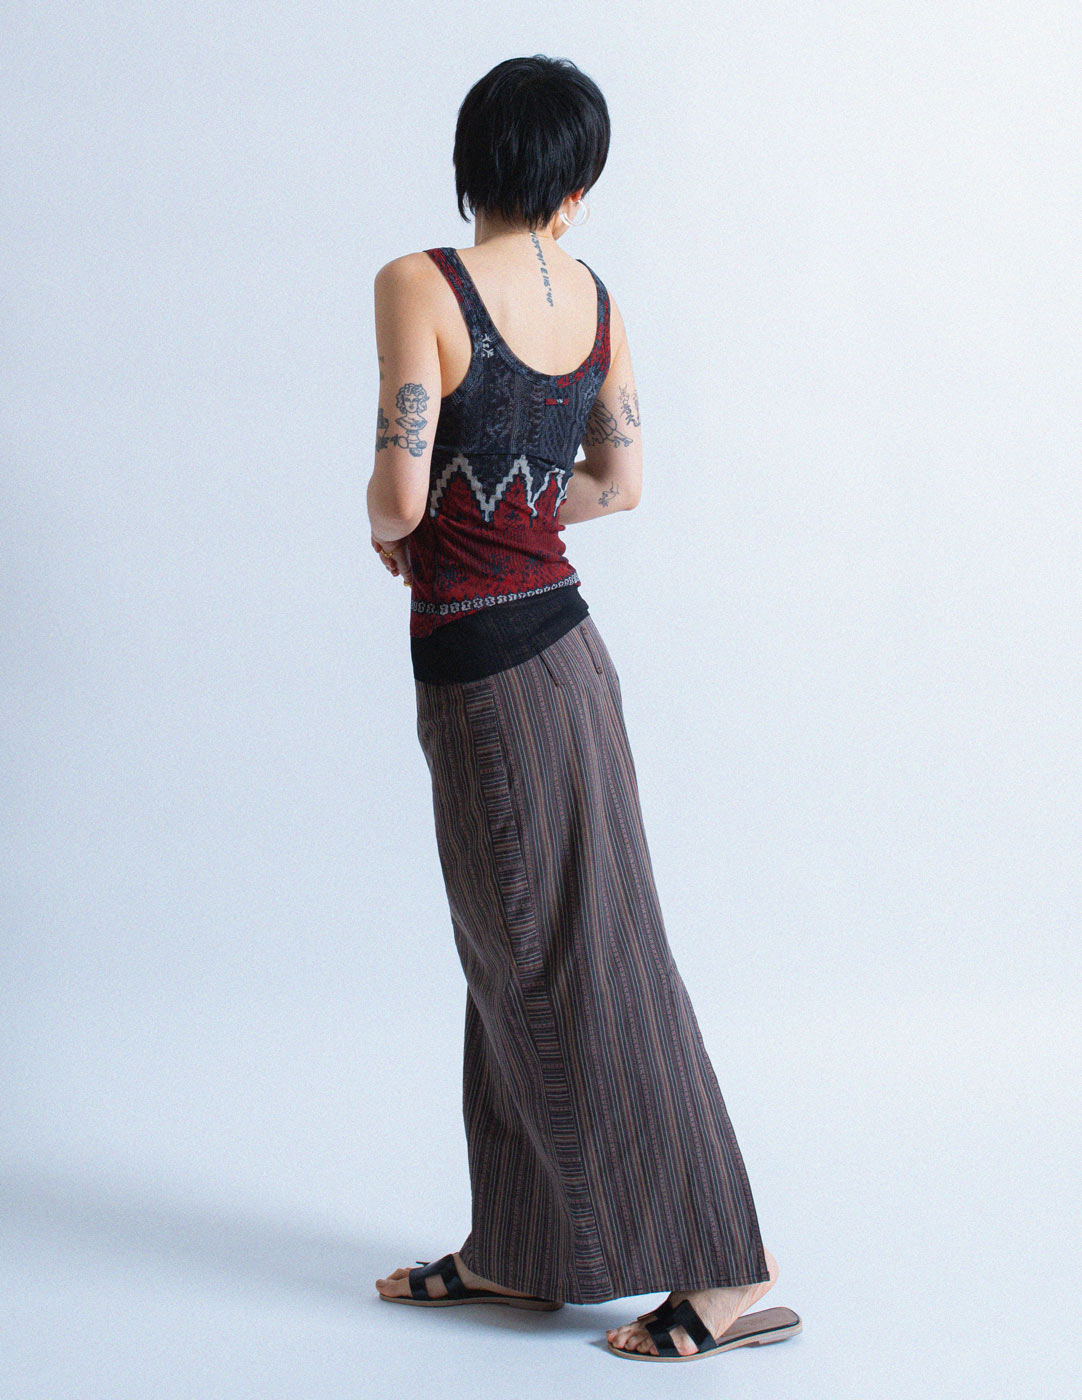 Jean Paul Gaultier vintage layered mesh tank back view